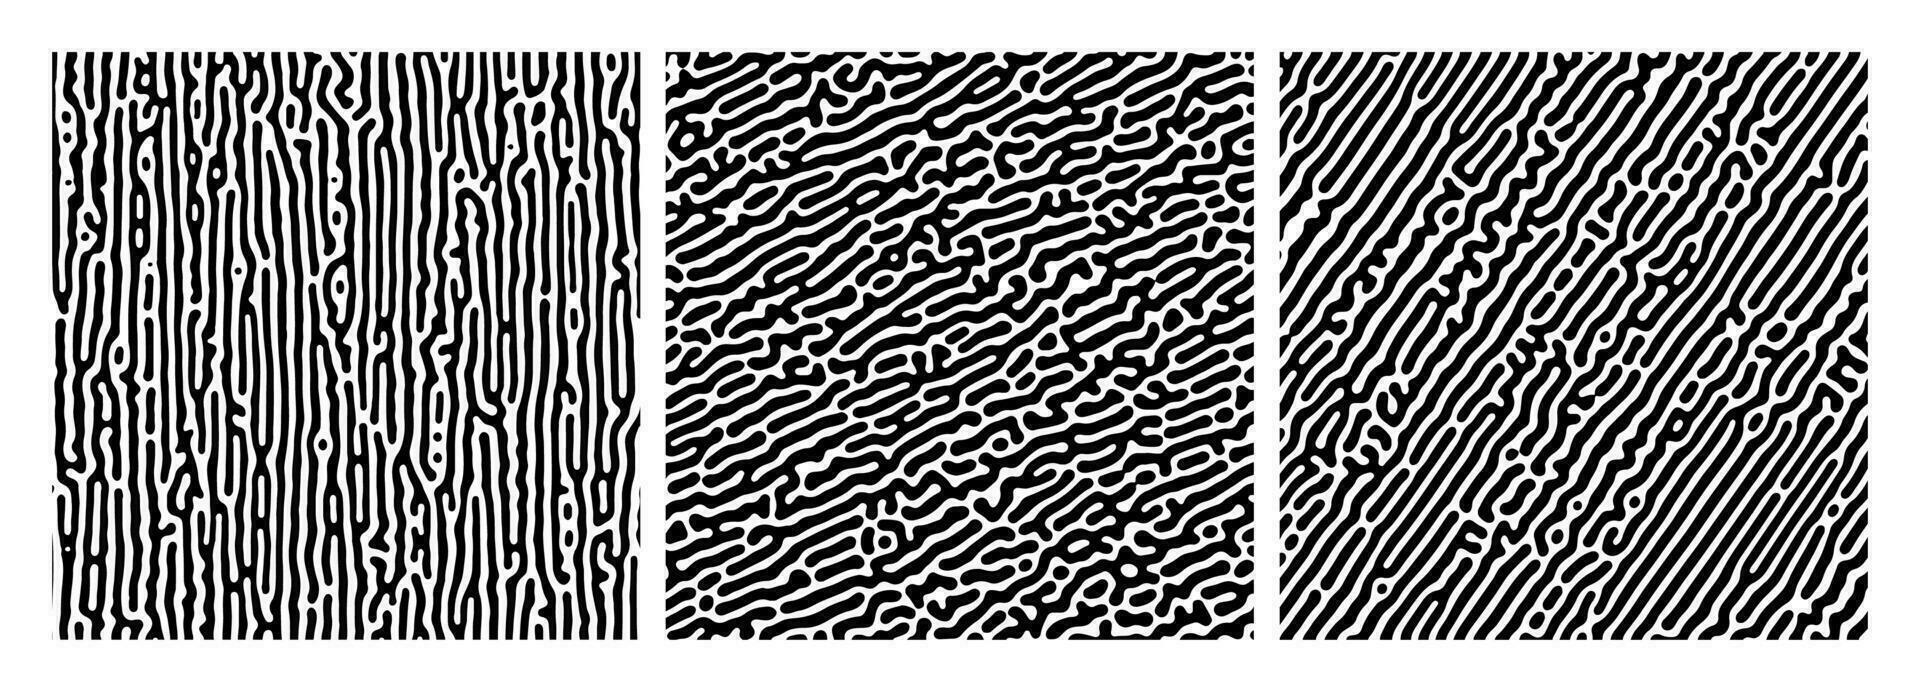 Set of three turing reaction gradient backgrounds. Abstract diffusion pattern with chaotic shapes. Vector illustration.